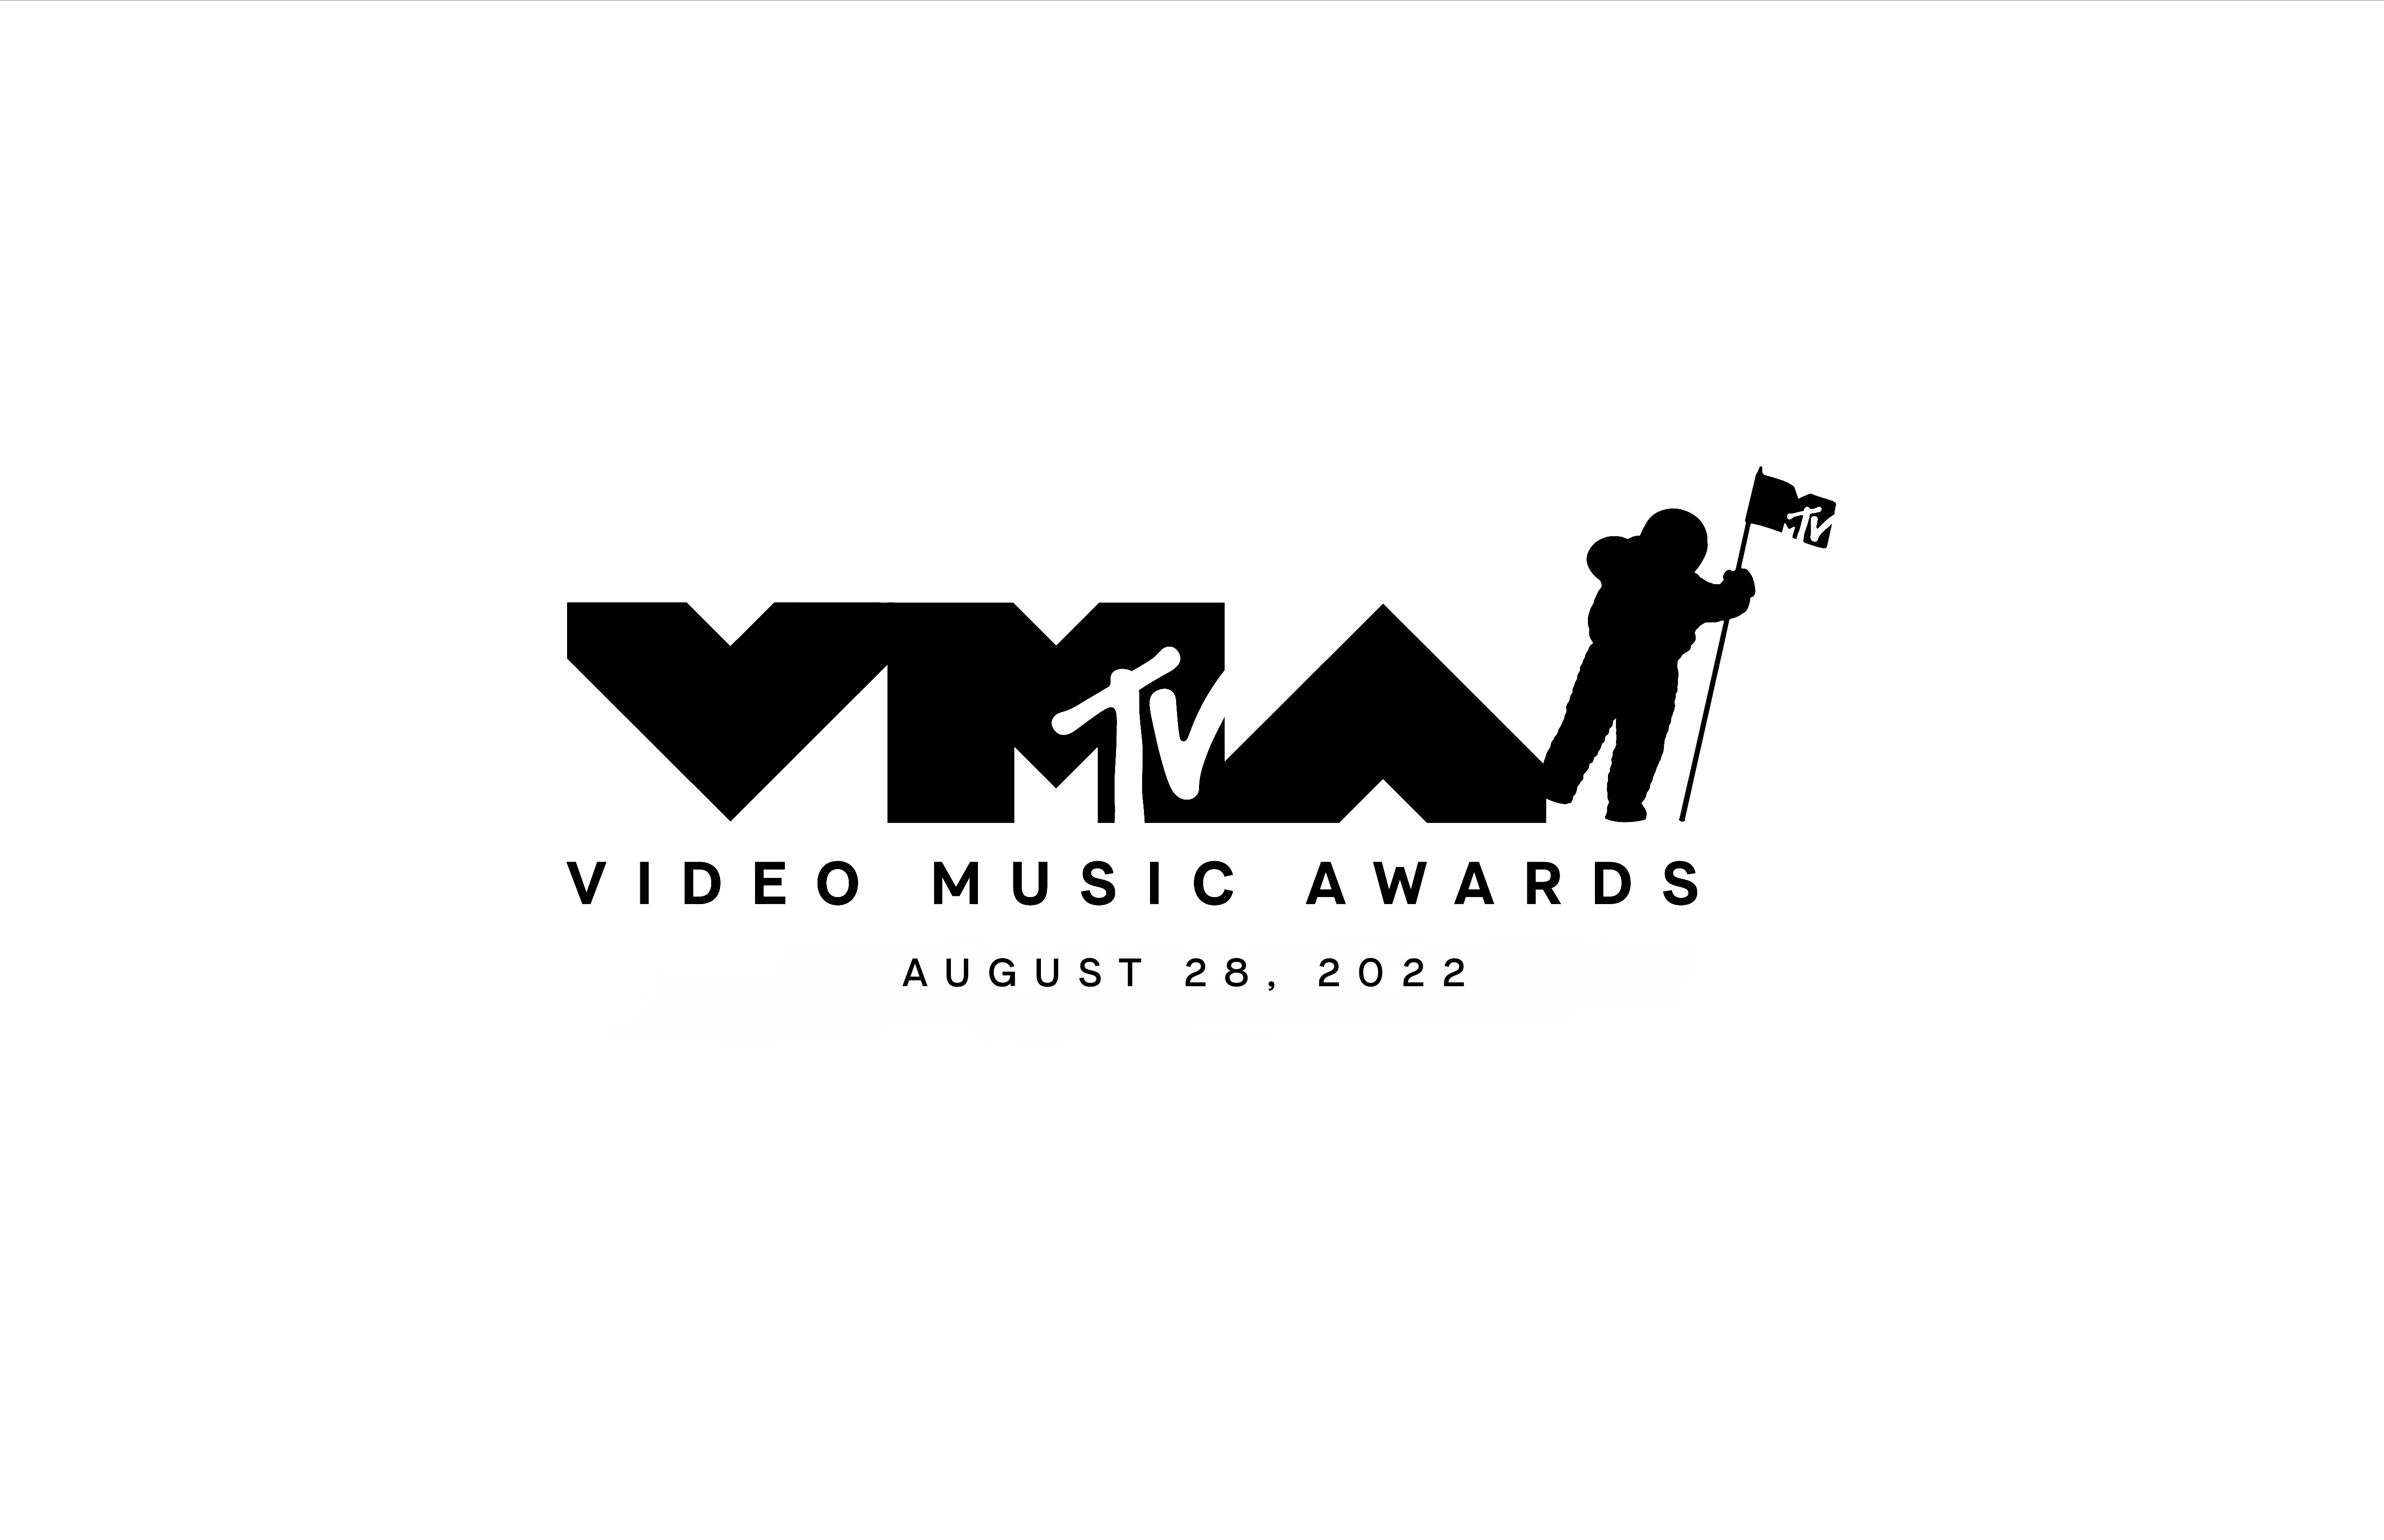 mtv video music awards 2022 takes place in august